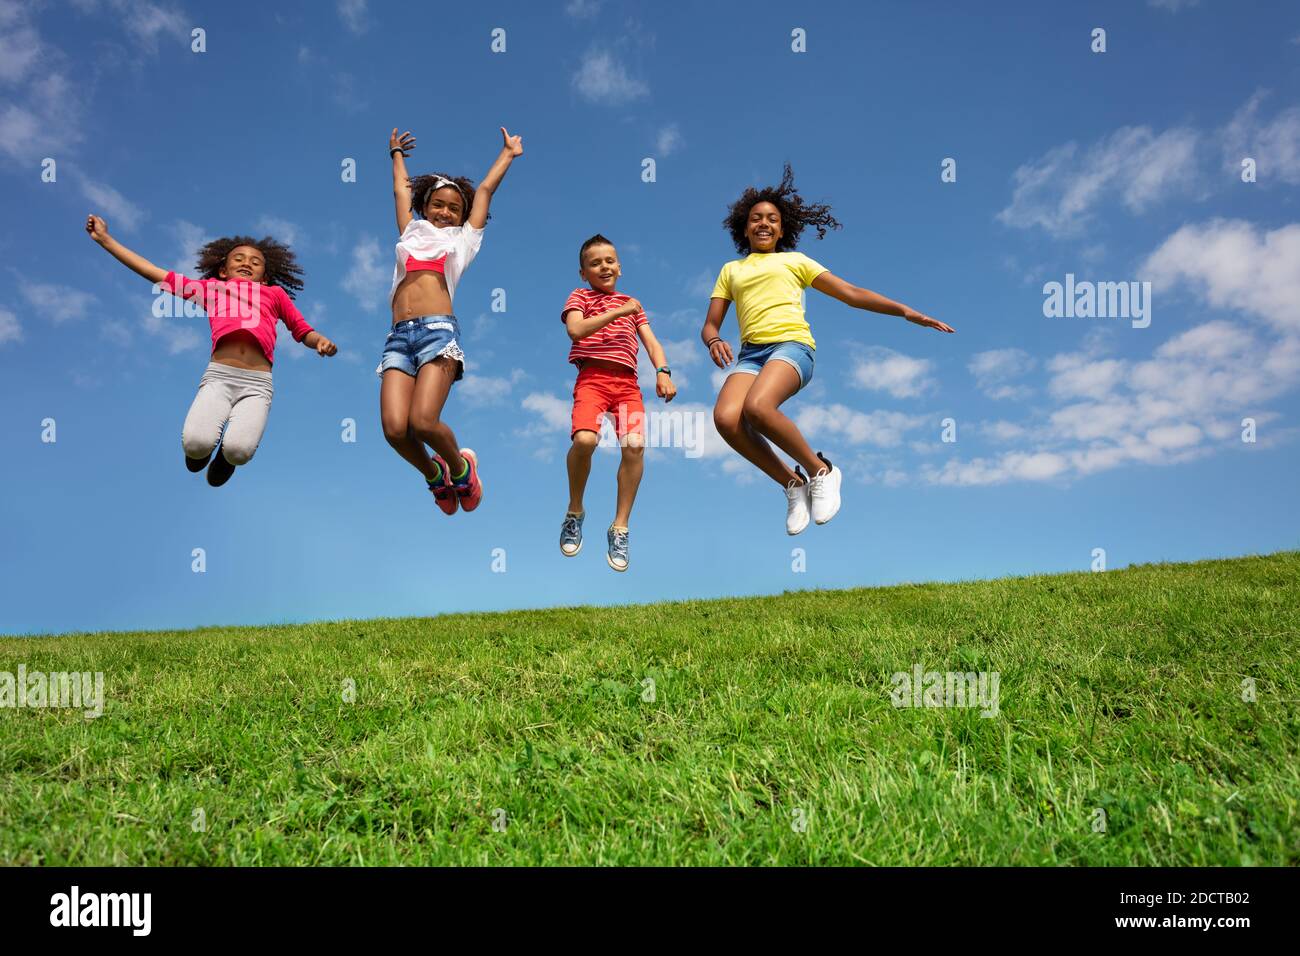 Group of kids jump high over blue sky and clouds, Stock image